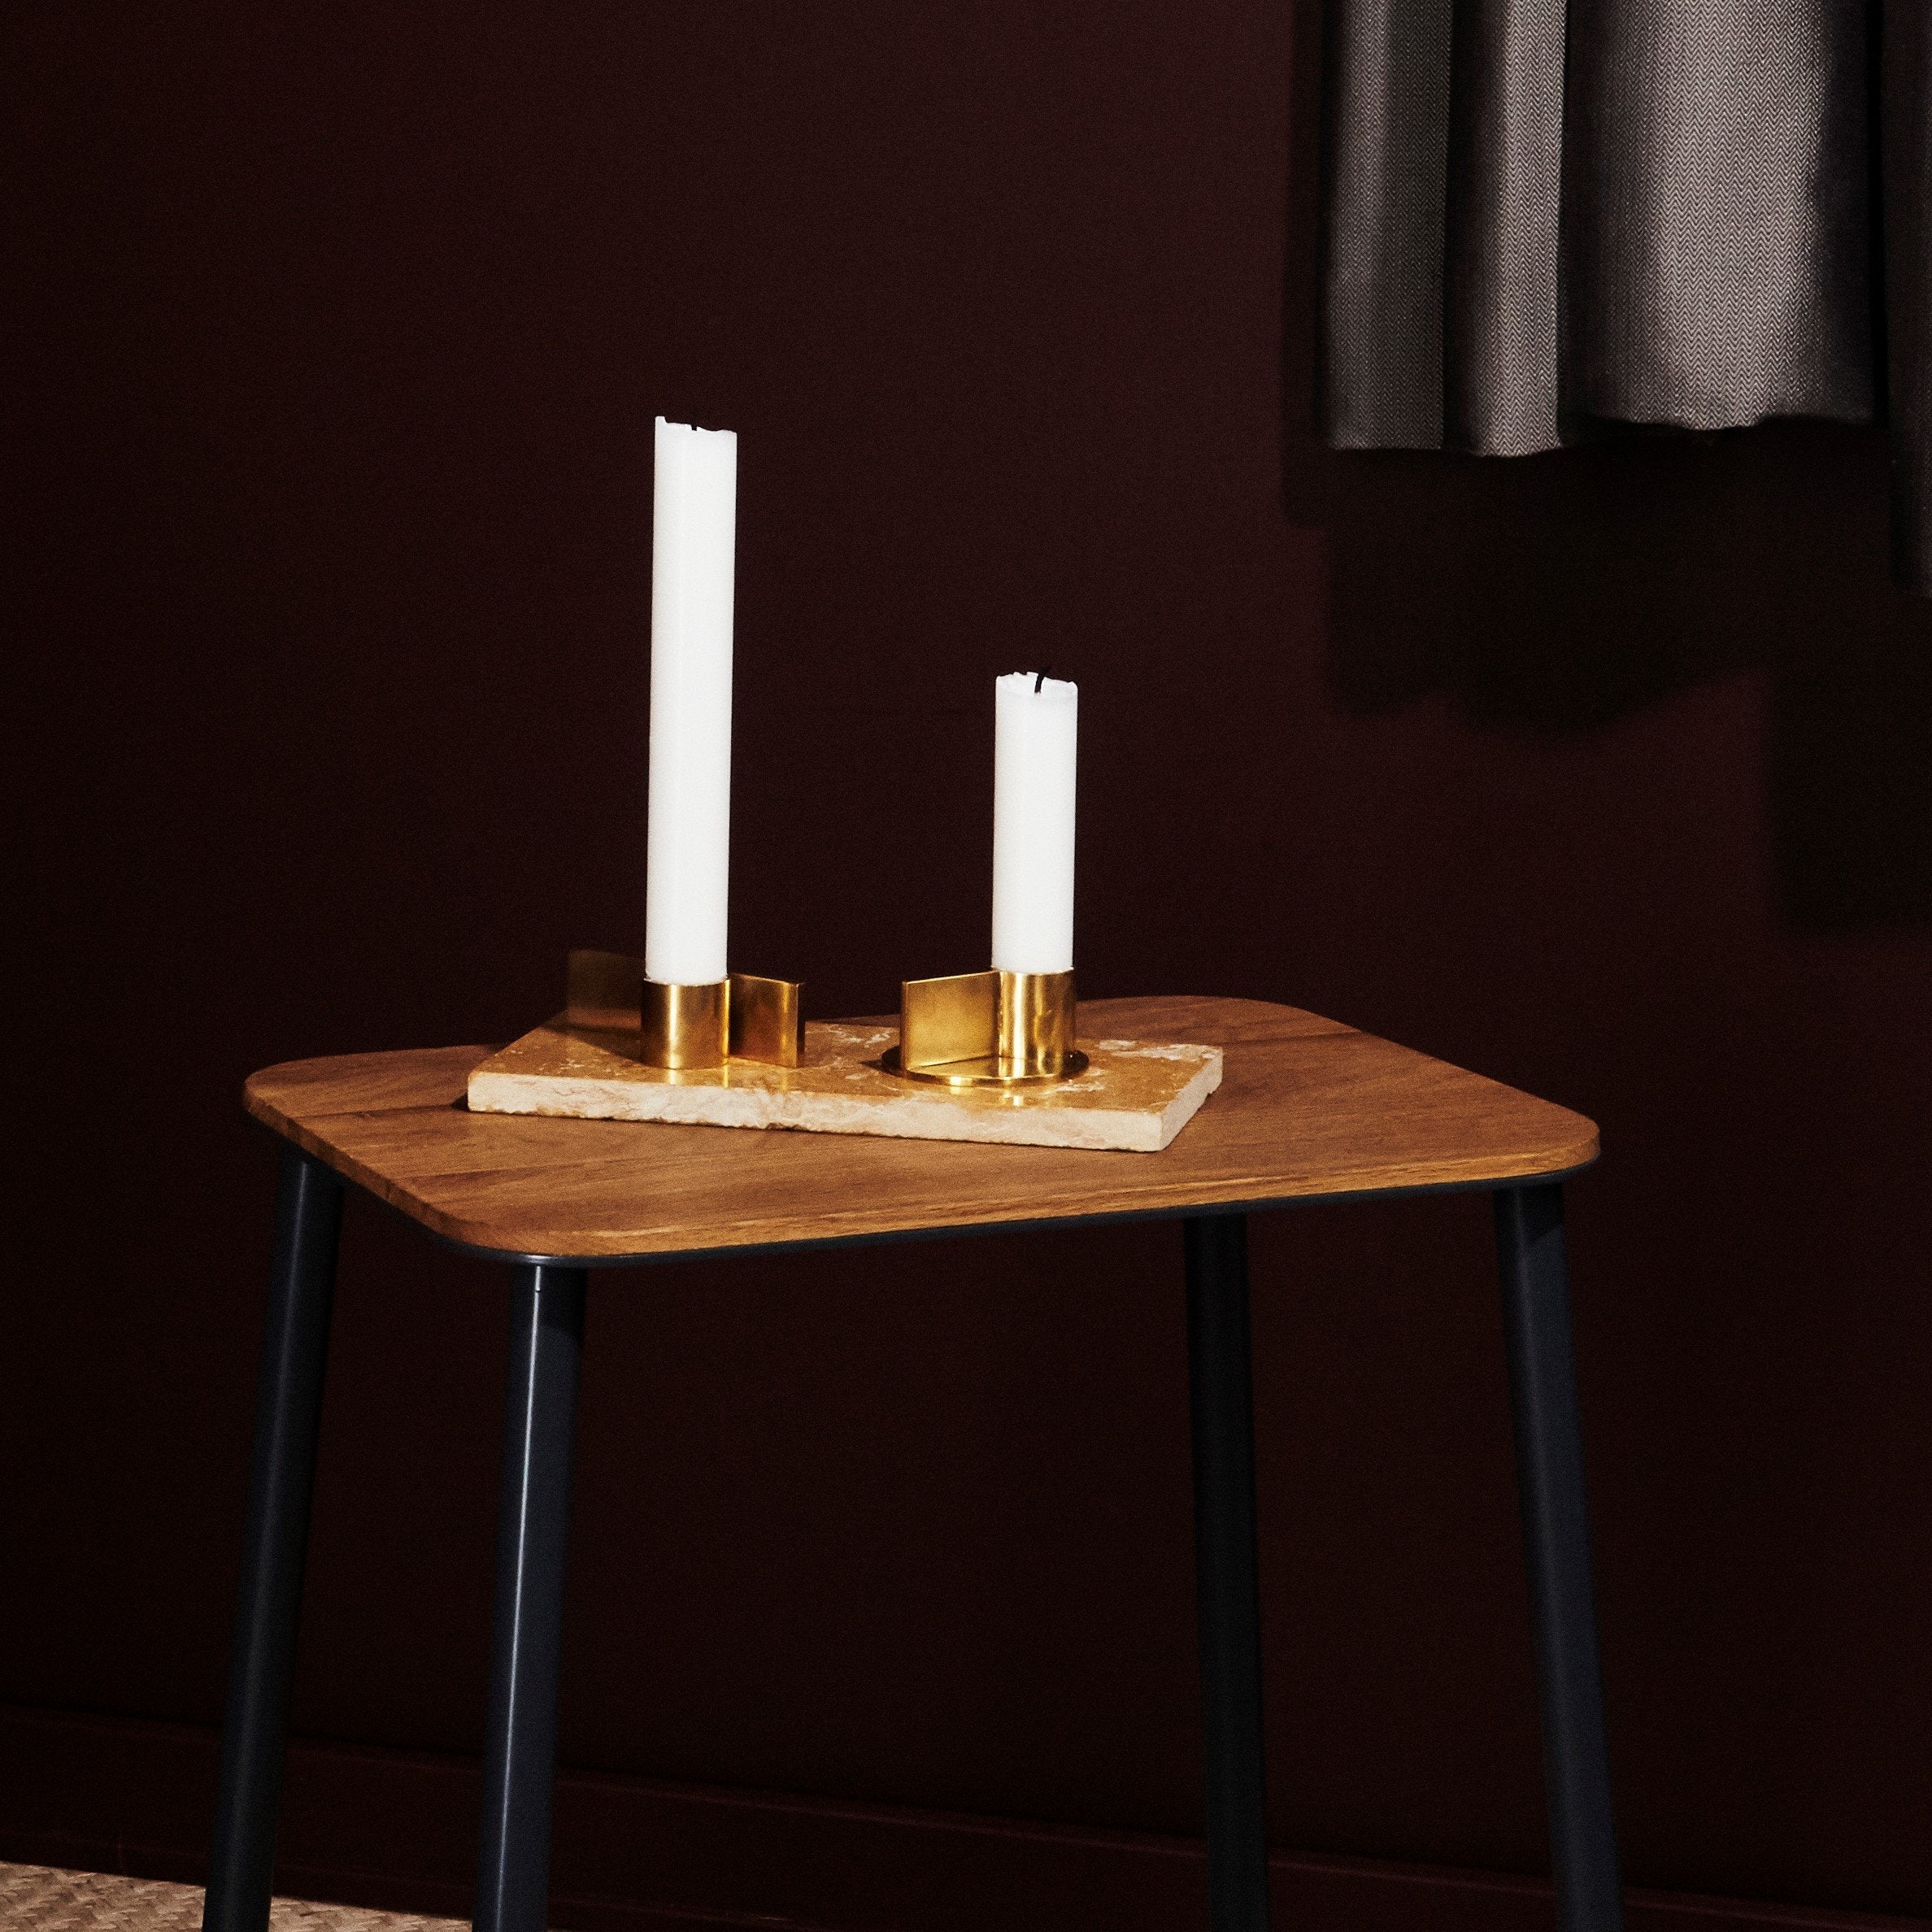 Geometric Candle Holder - Japanese Brass Collection